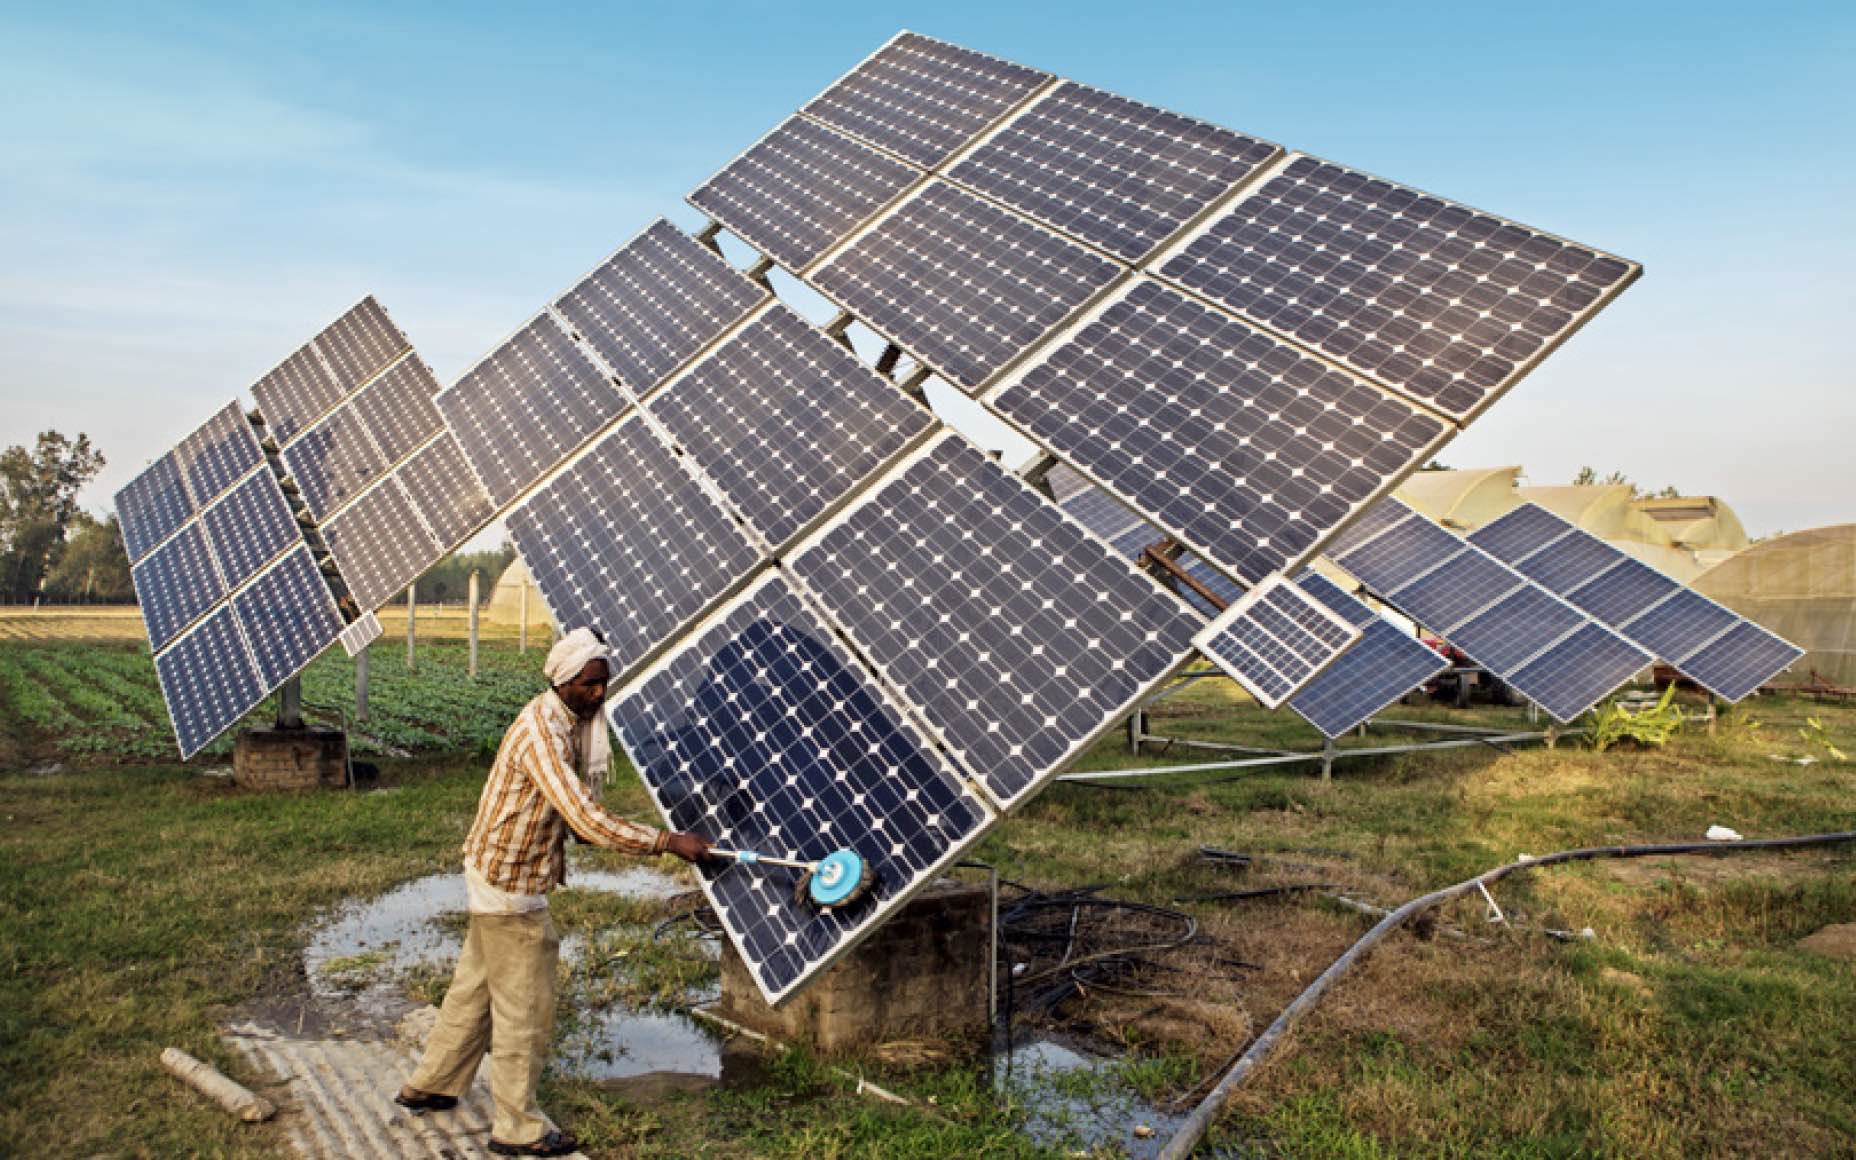 A farm worker in India cleans solar panels